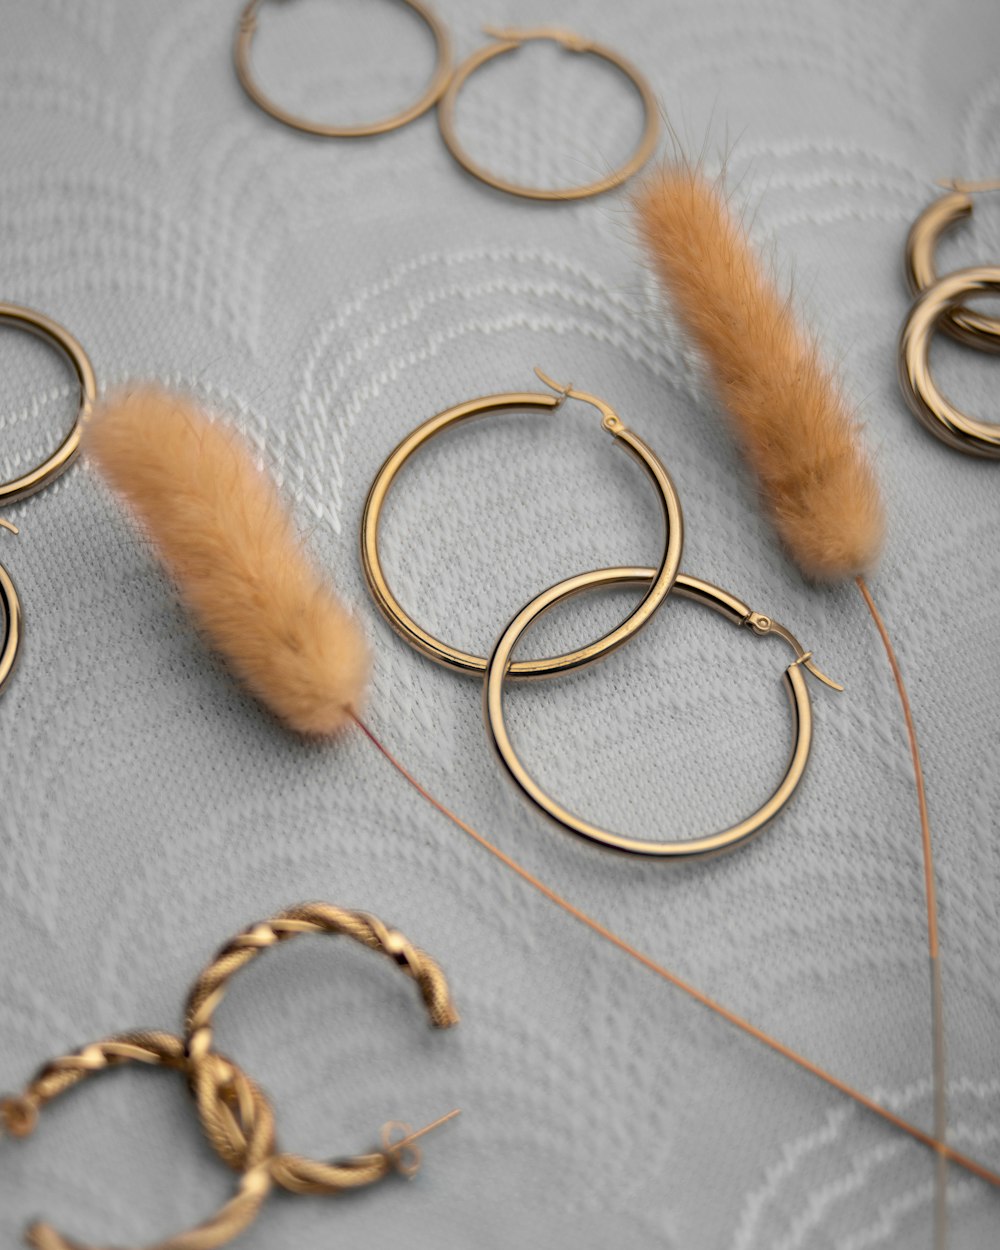 a close up of some gold rings and some feathers